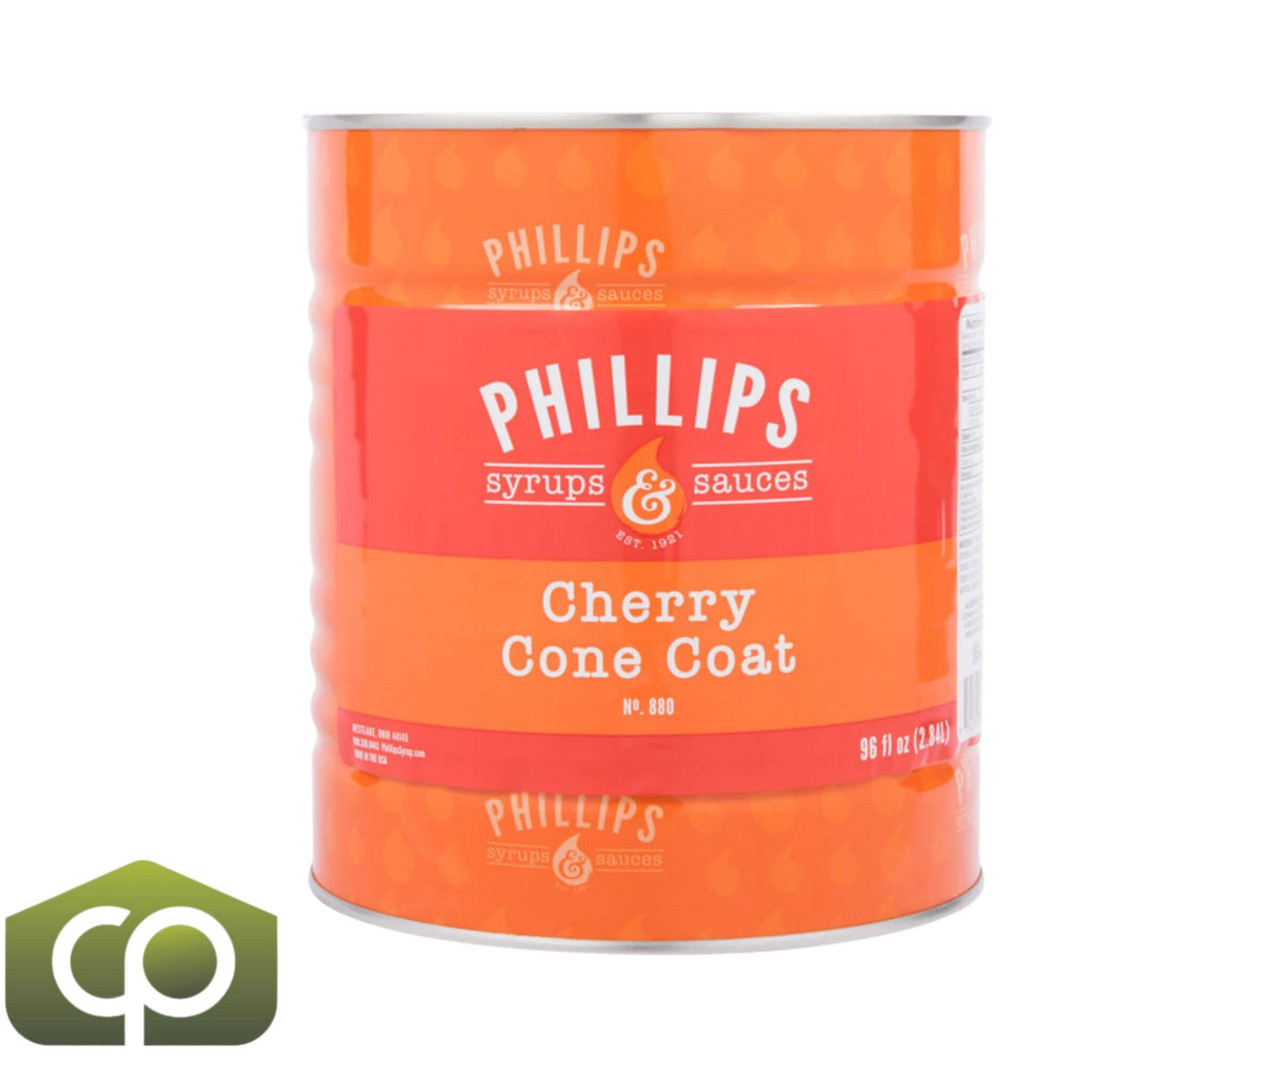 Phillips Cherry Ice Cream Shell Coating - 6.75 lbs. (3.06 kg) - #10 Can-Chicken Pieces